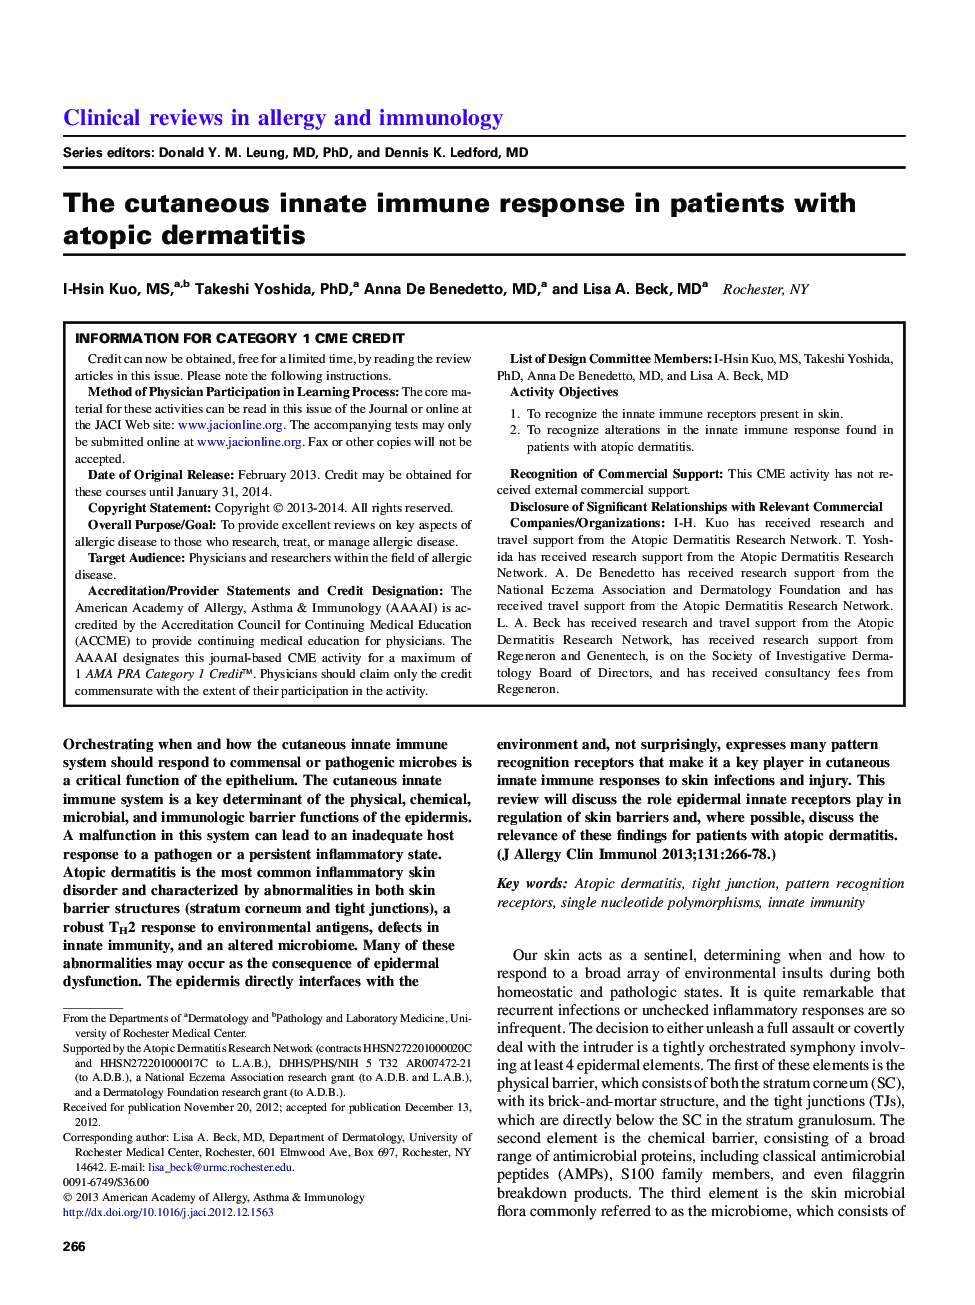 The cutaneous innate immune response in patients with atopic dermatitis 